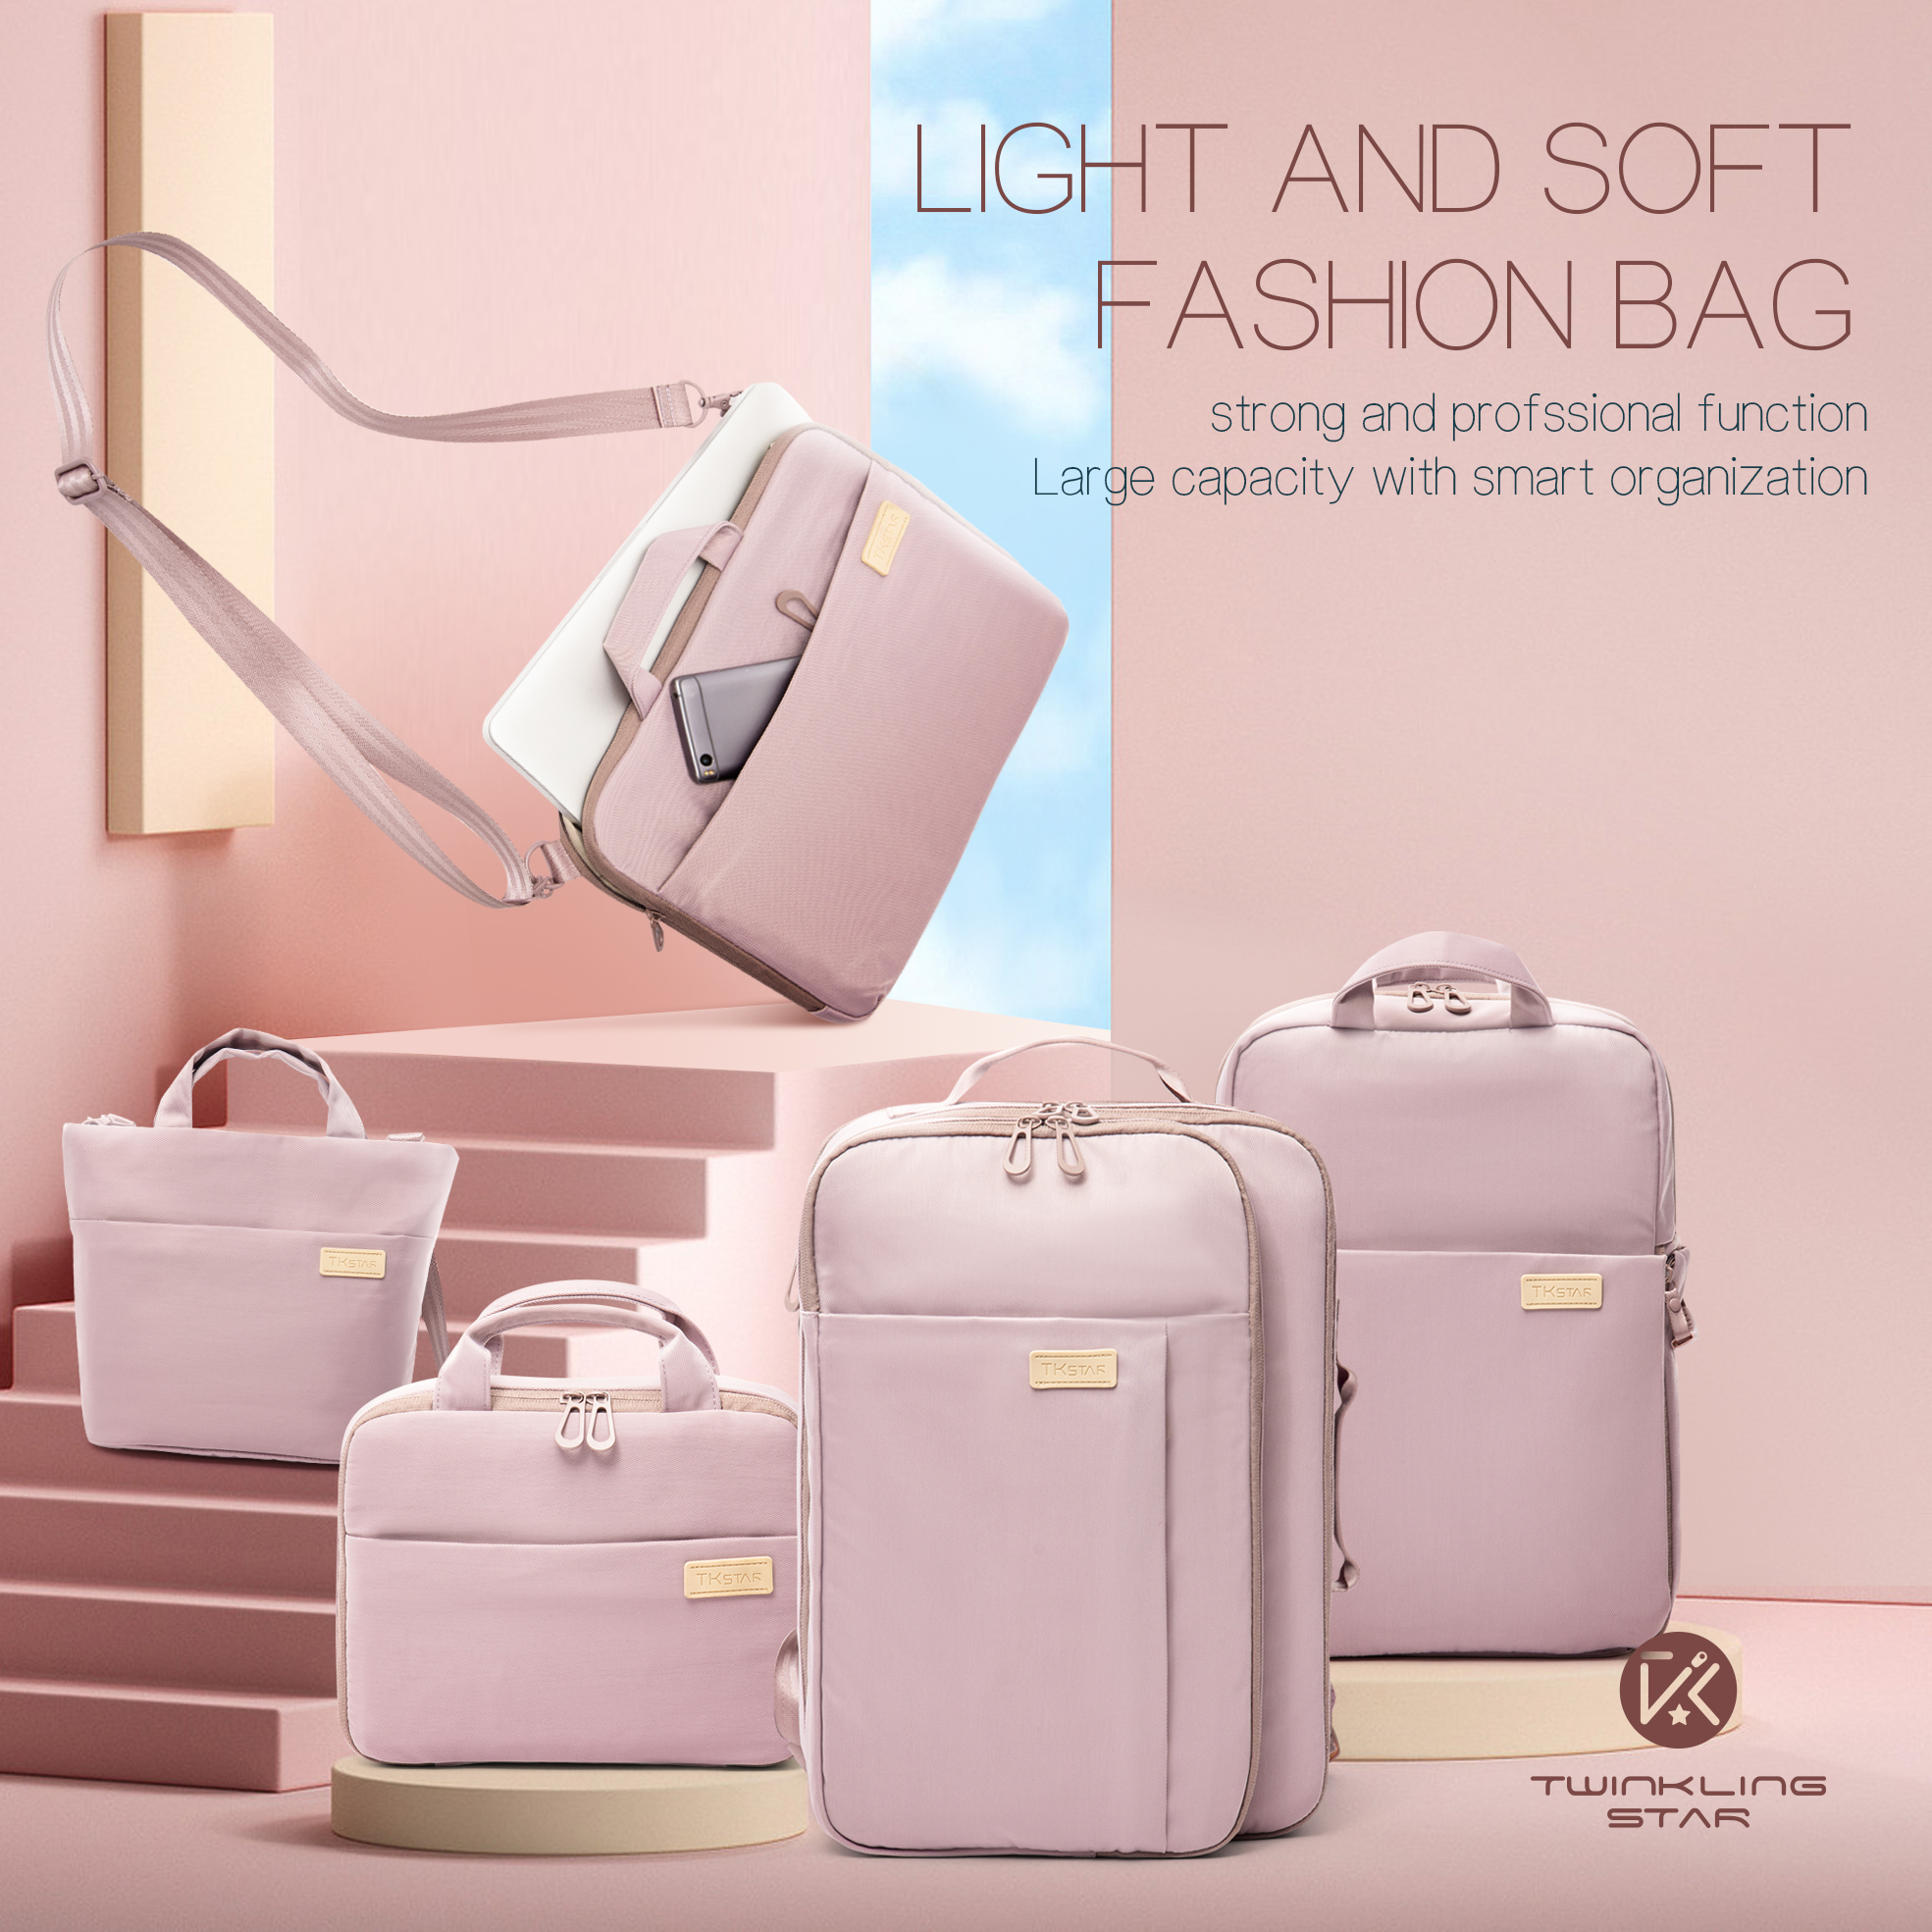 Twinkling Star|asual fashion light business women backpack laptop bag toiletry multifunction bag set